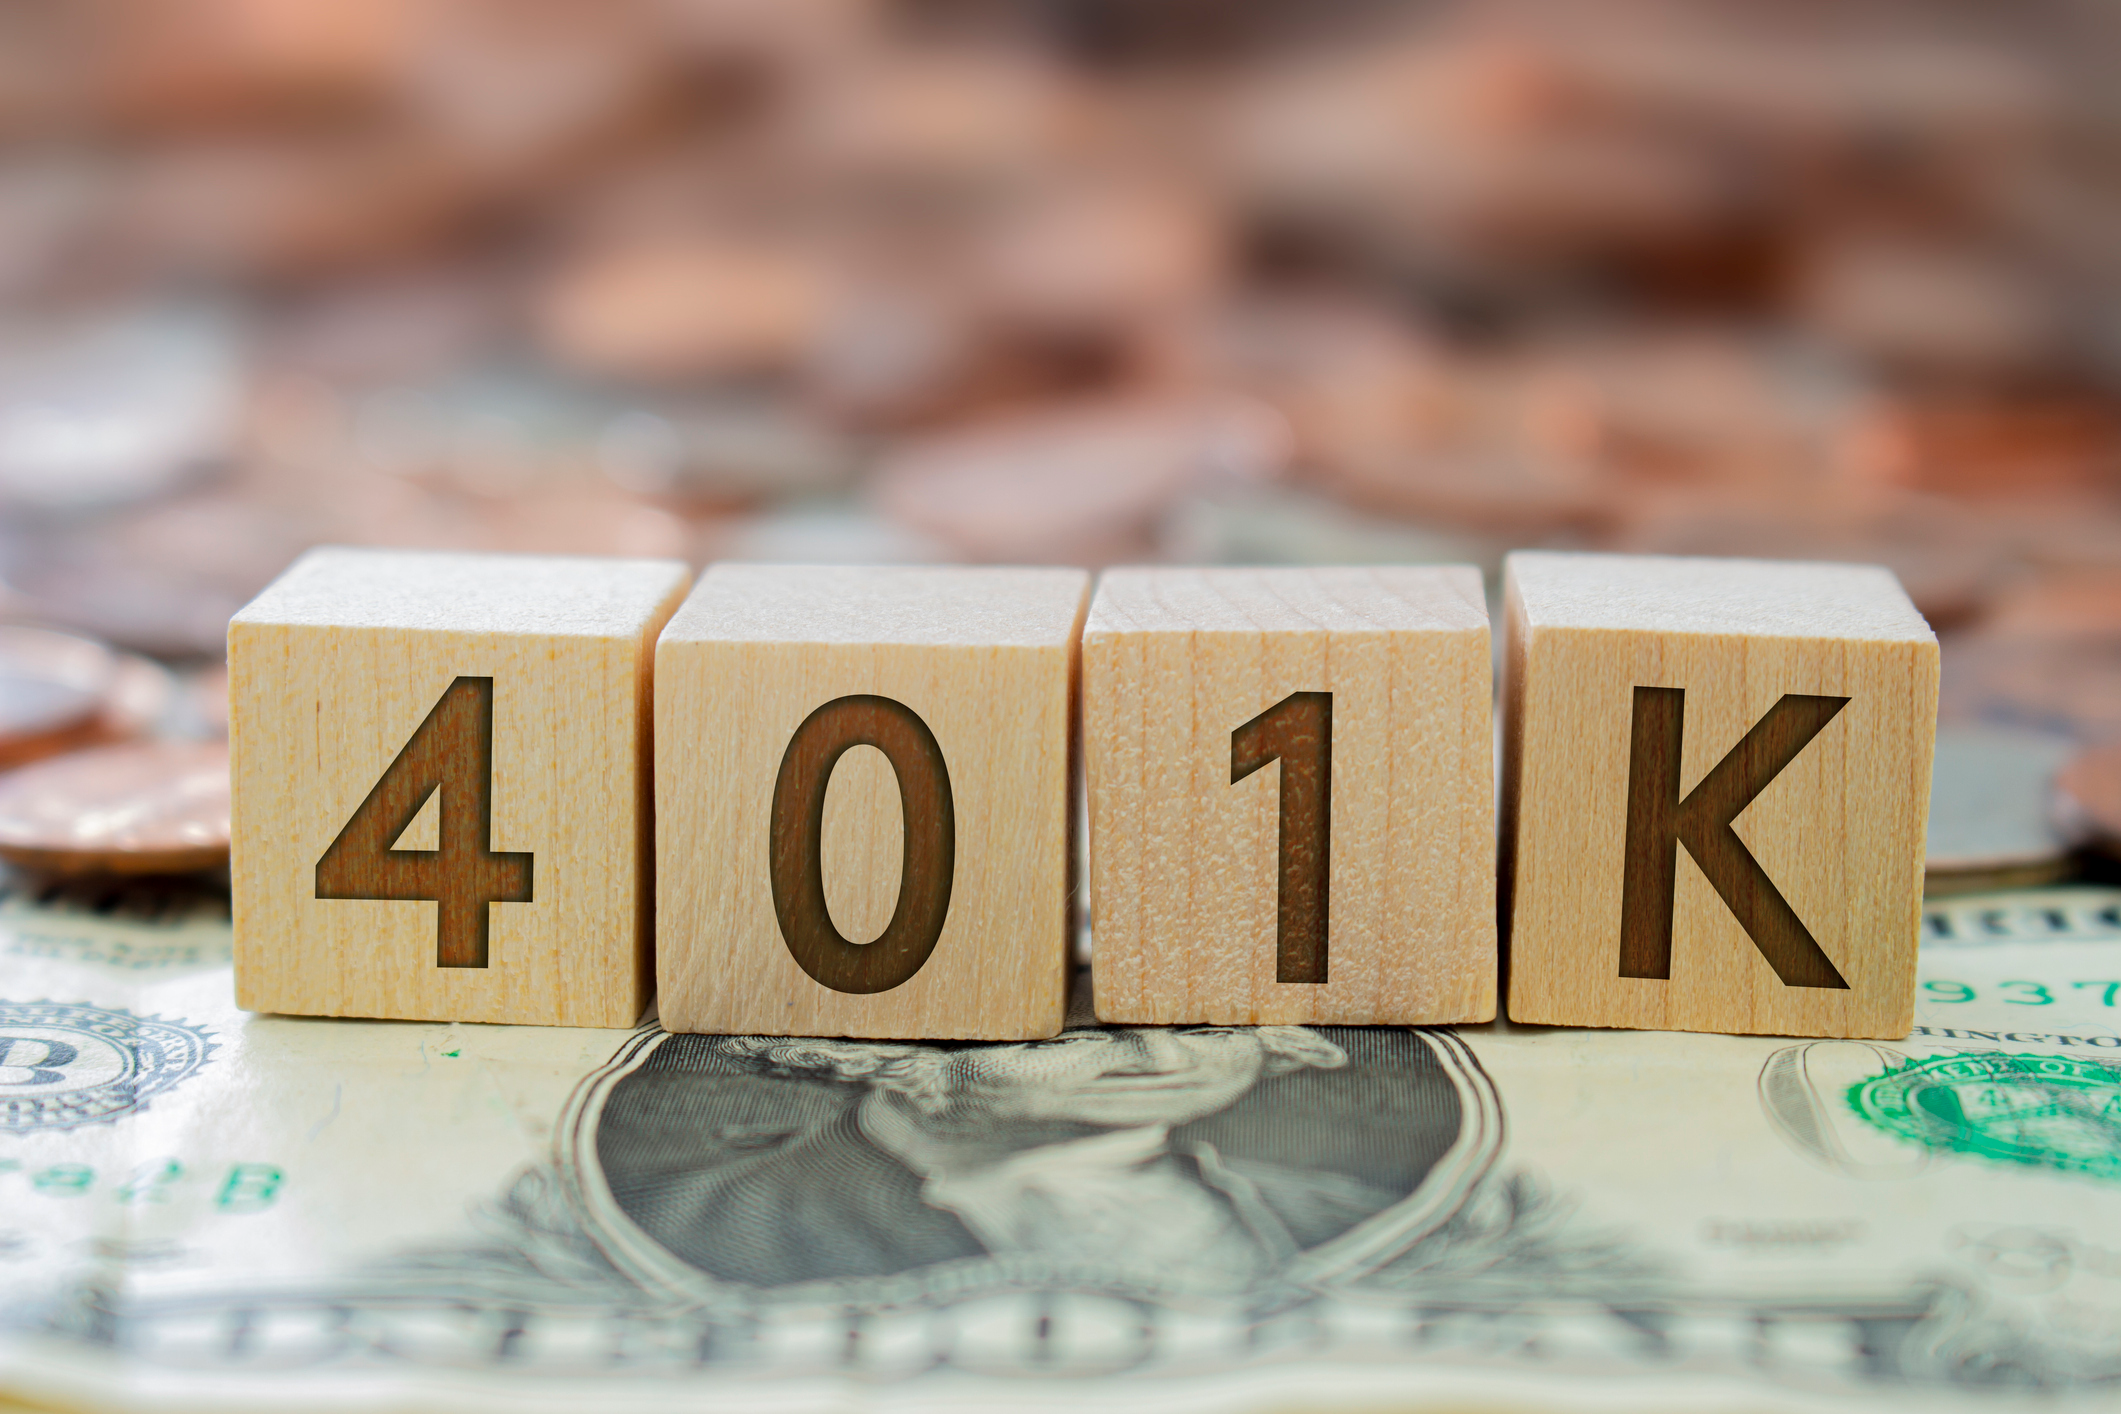 What to know before making a withdrawal from your 401k